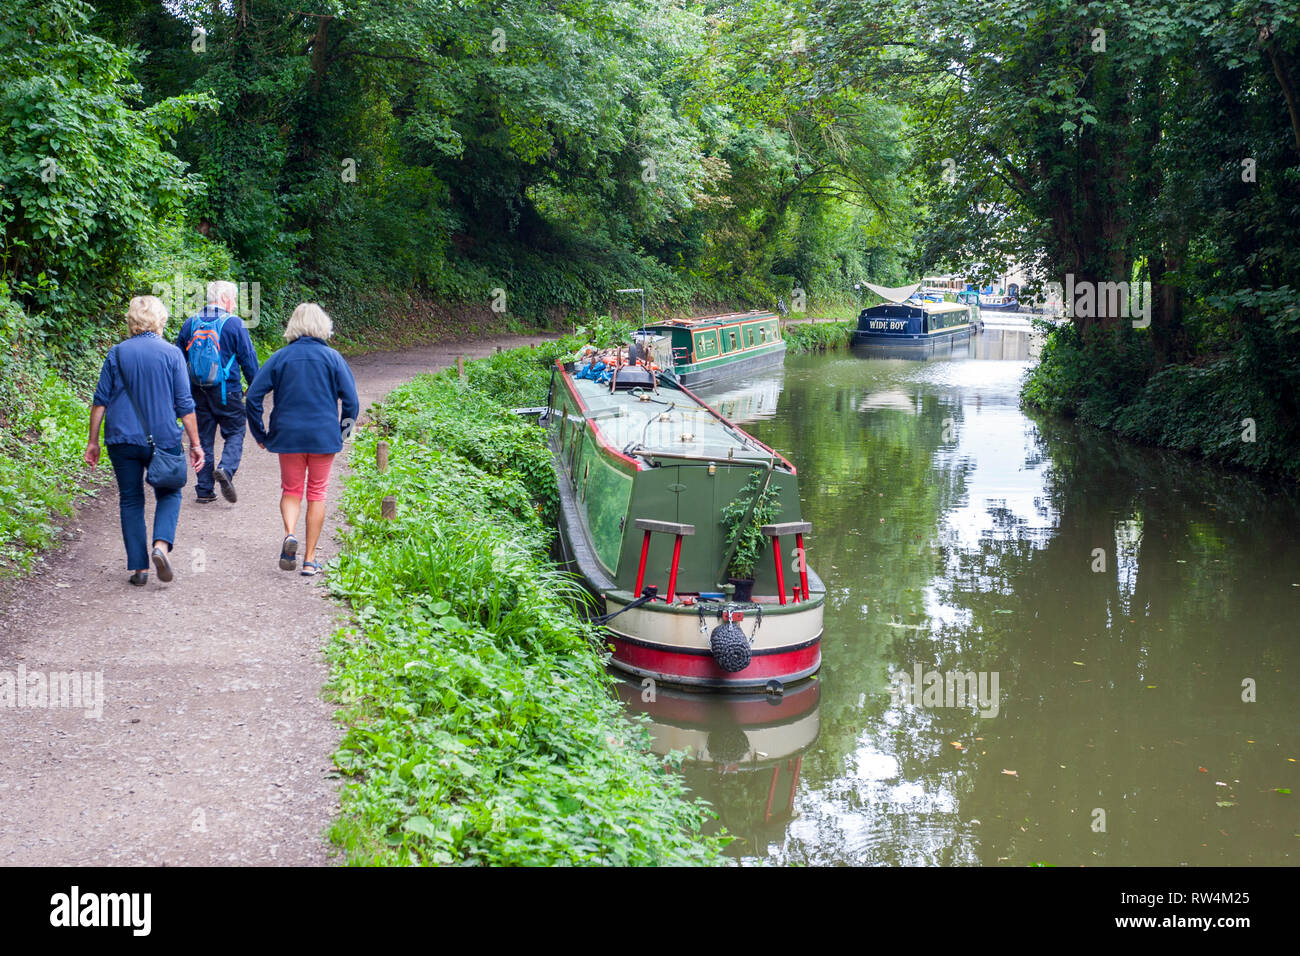 The tow path of the Kennet & Avon Canal in Bath, N.E. Somerset, England, UK Stock Photo